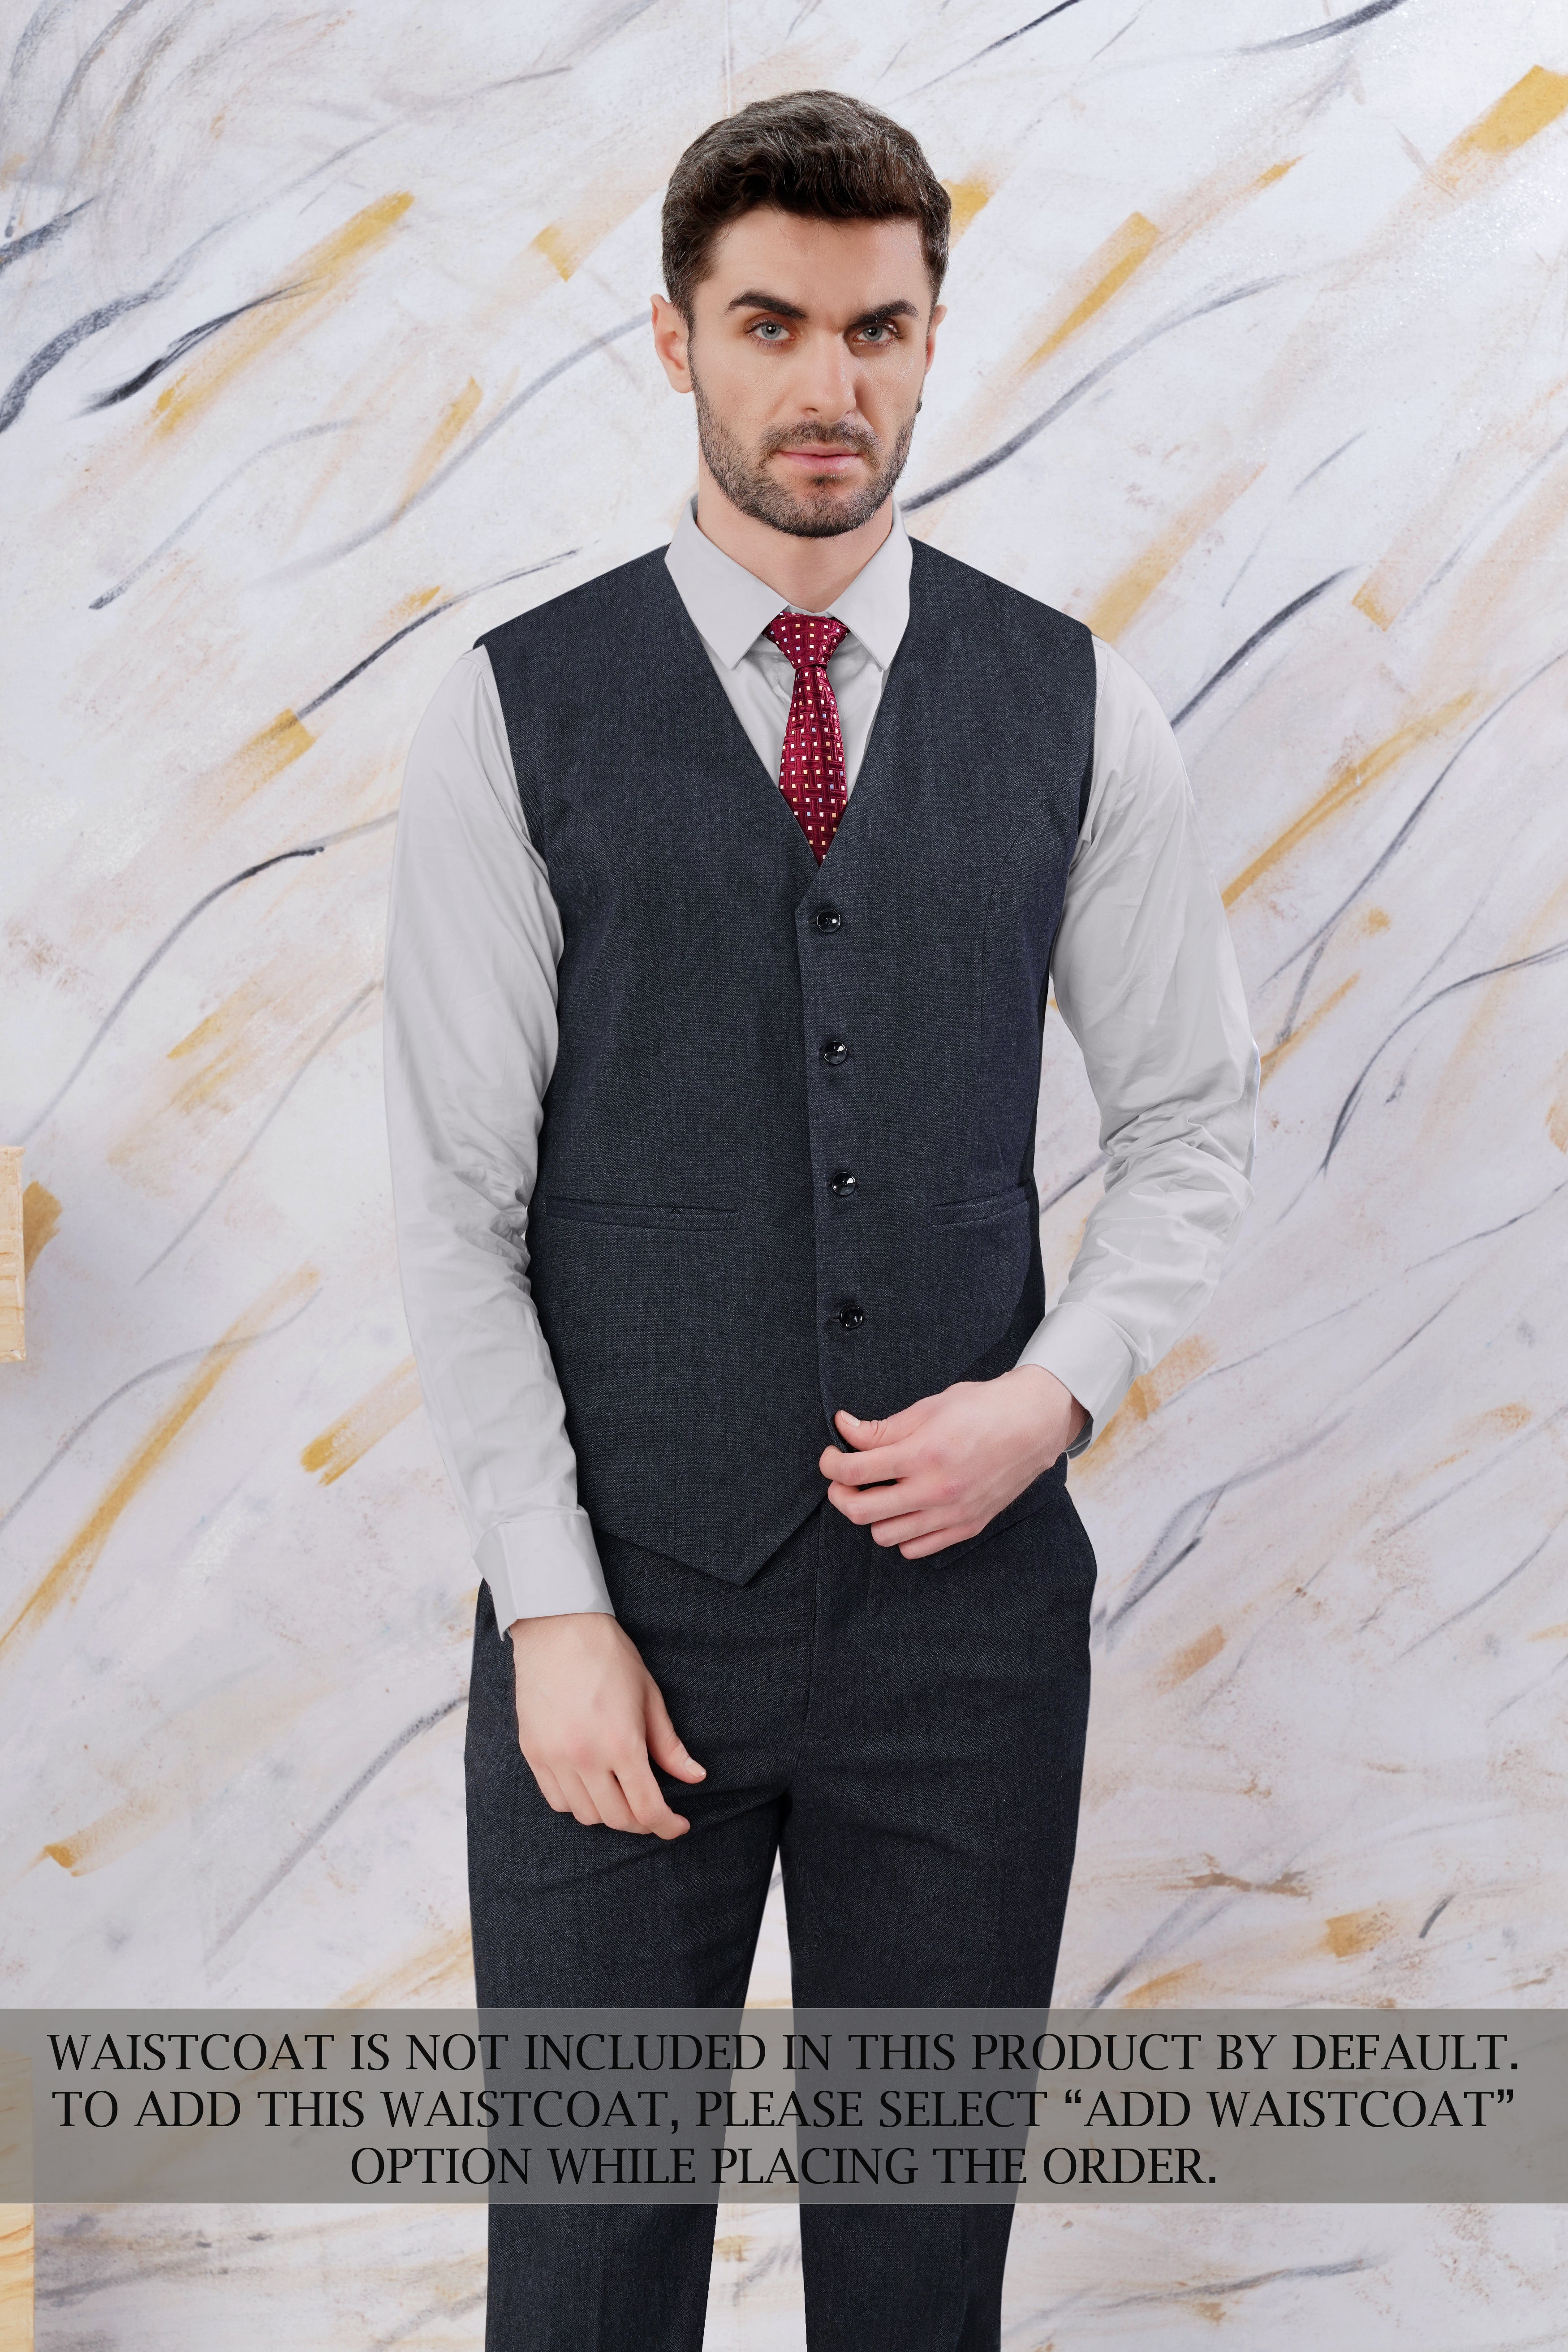 Delft Gray Wool Rich Single Breasted Suit ST3092-SB-36, ST3092-SB-38, ST3092-SB-40, ST3092-SB-42, ST3092-SB-44, ST3092-SB-46, ST3092-SB-48, ST3092-SB-50, ST3092-SB-52, ST3092-SB-54, ST3092-SB-56, ST3092-SB-58, ST3092-SB-60